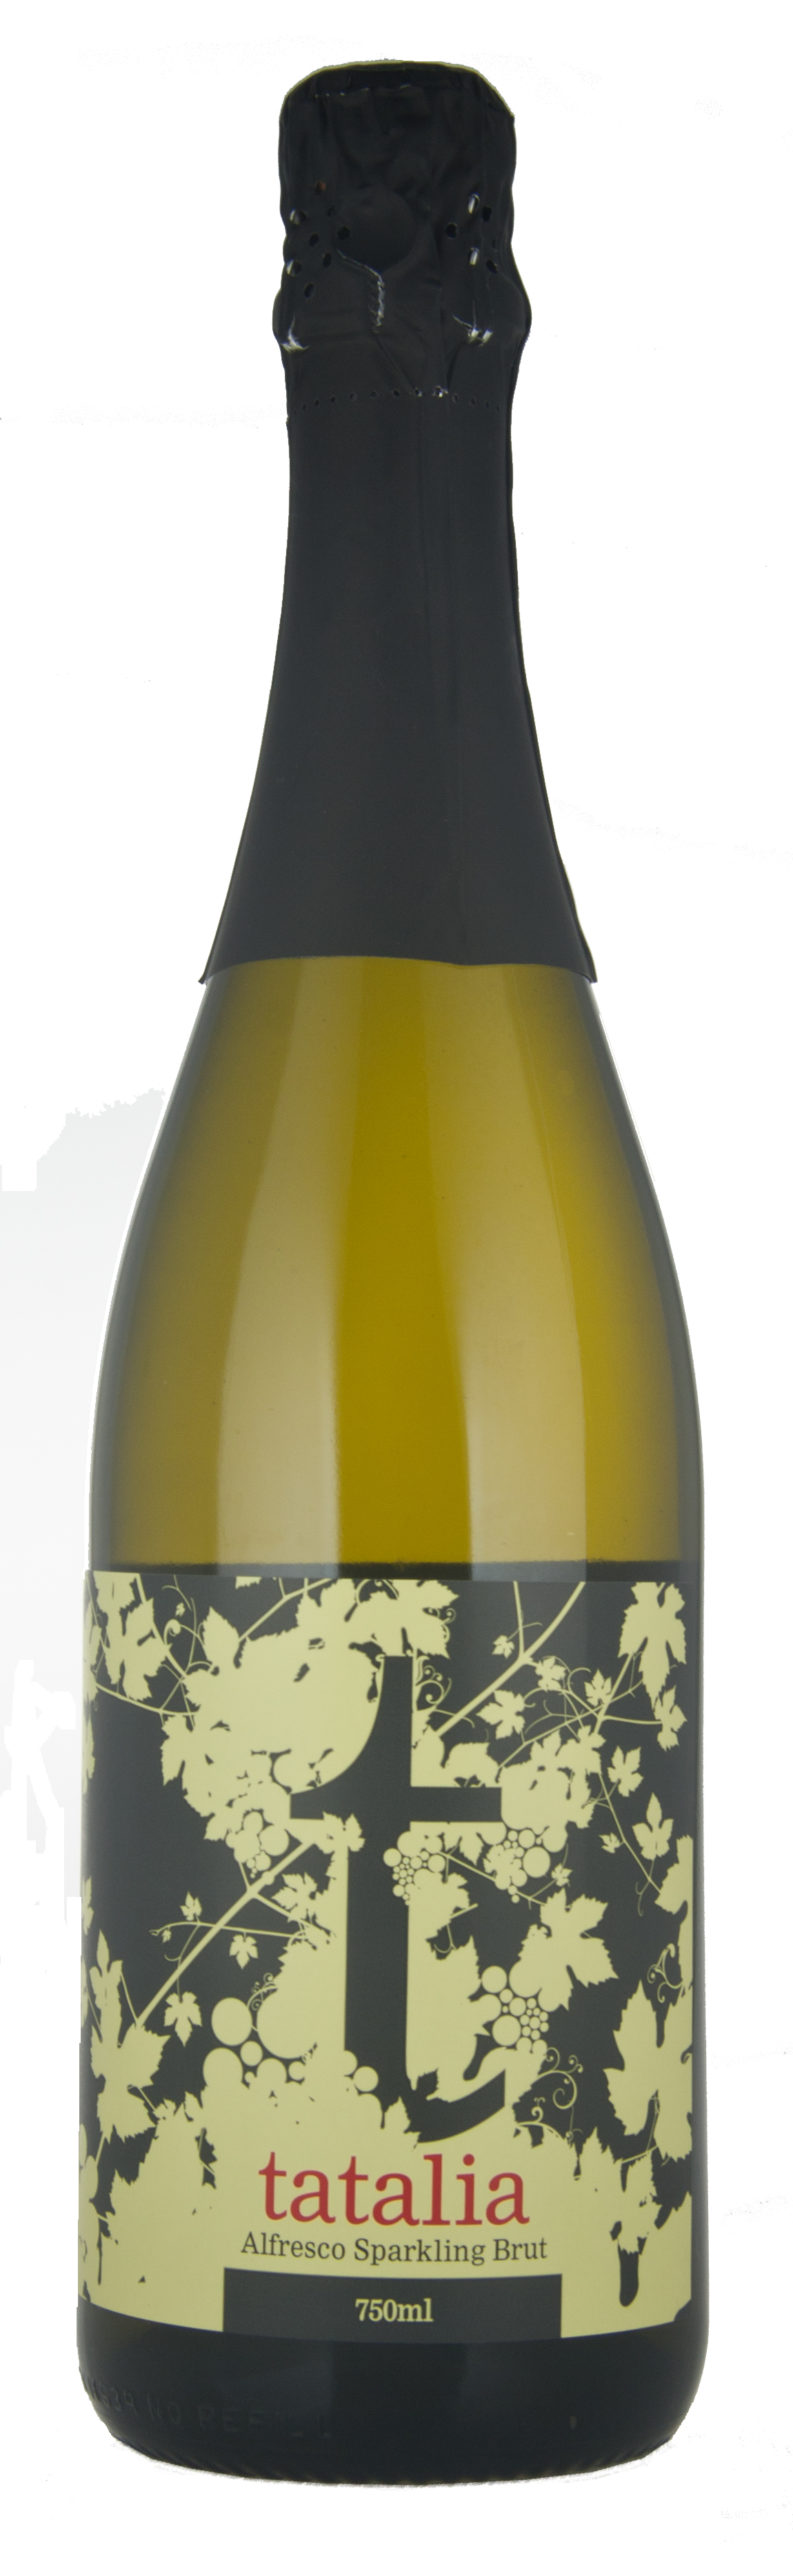 Tatalia Alefresco Sparkling Brut White Wine from St Anne's Winery